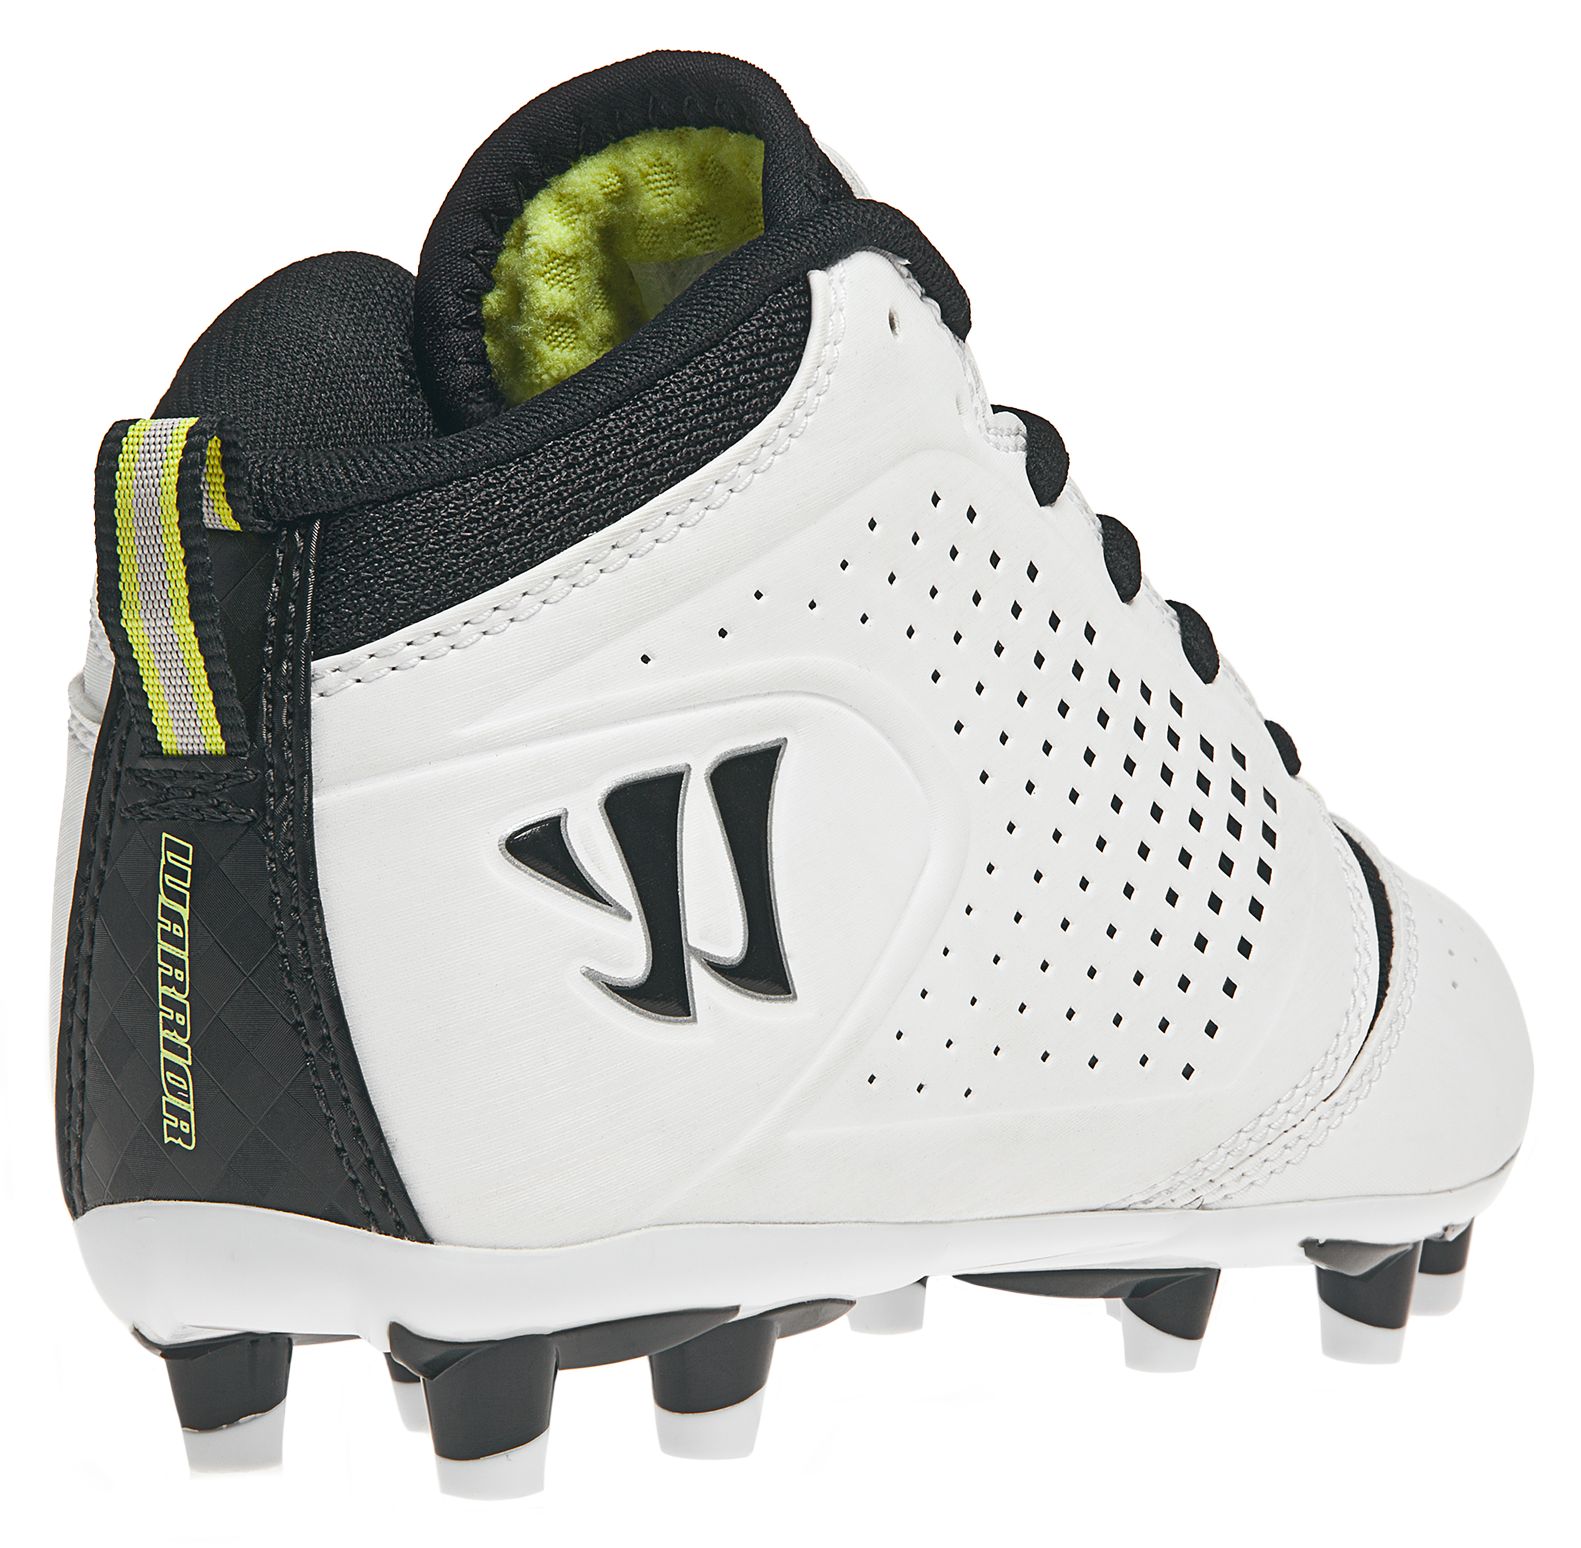 Youth Burn Speed Jr. 5.0 Cleat, White with Black image number 4